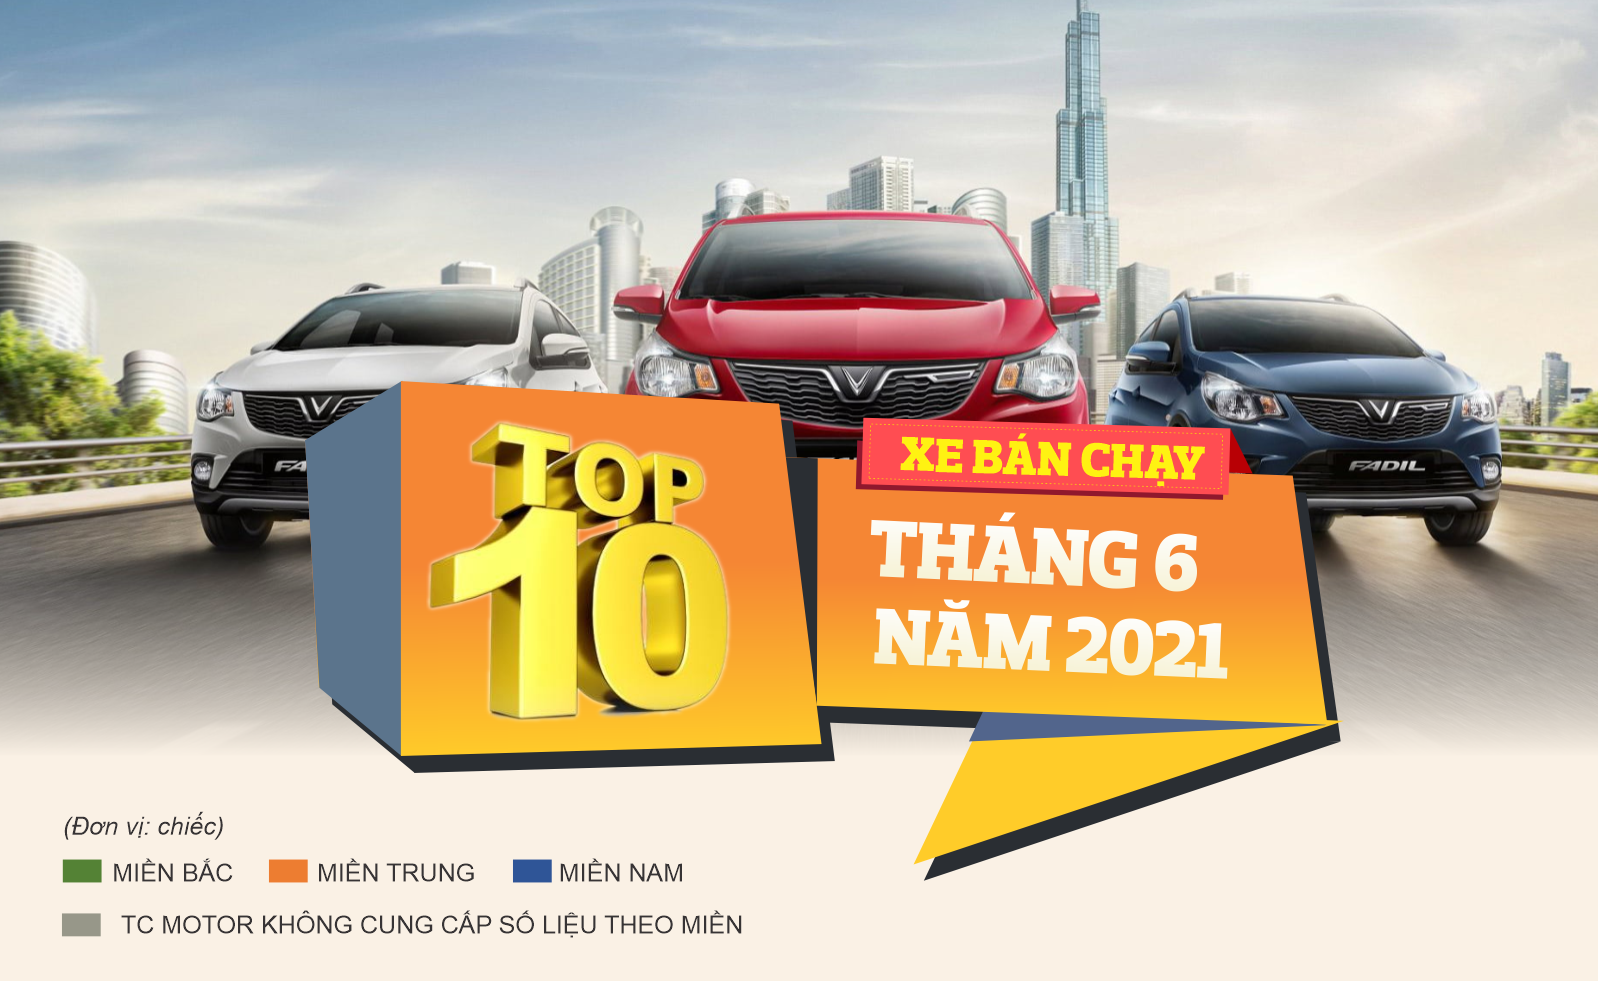 infographic top 10 xe ban chay thang 62021